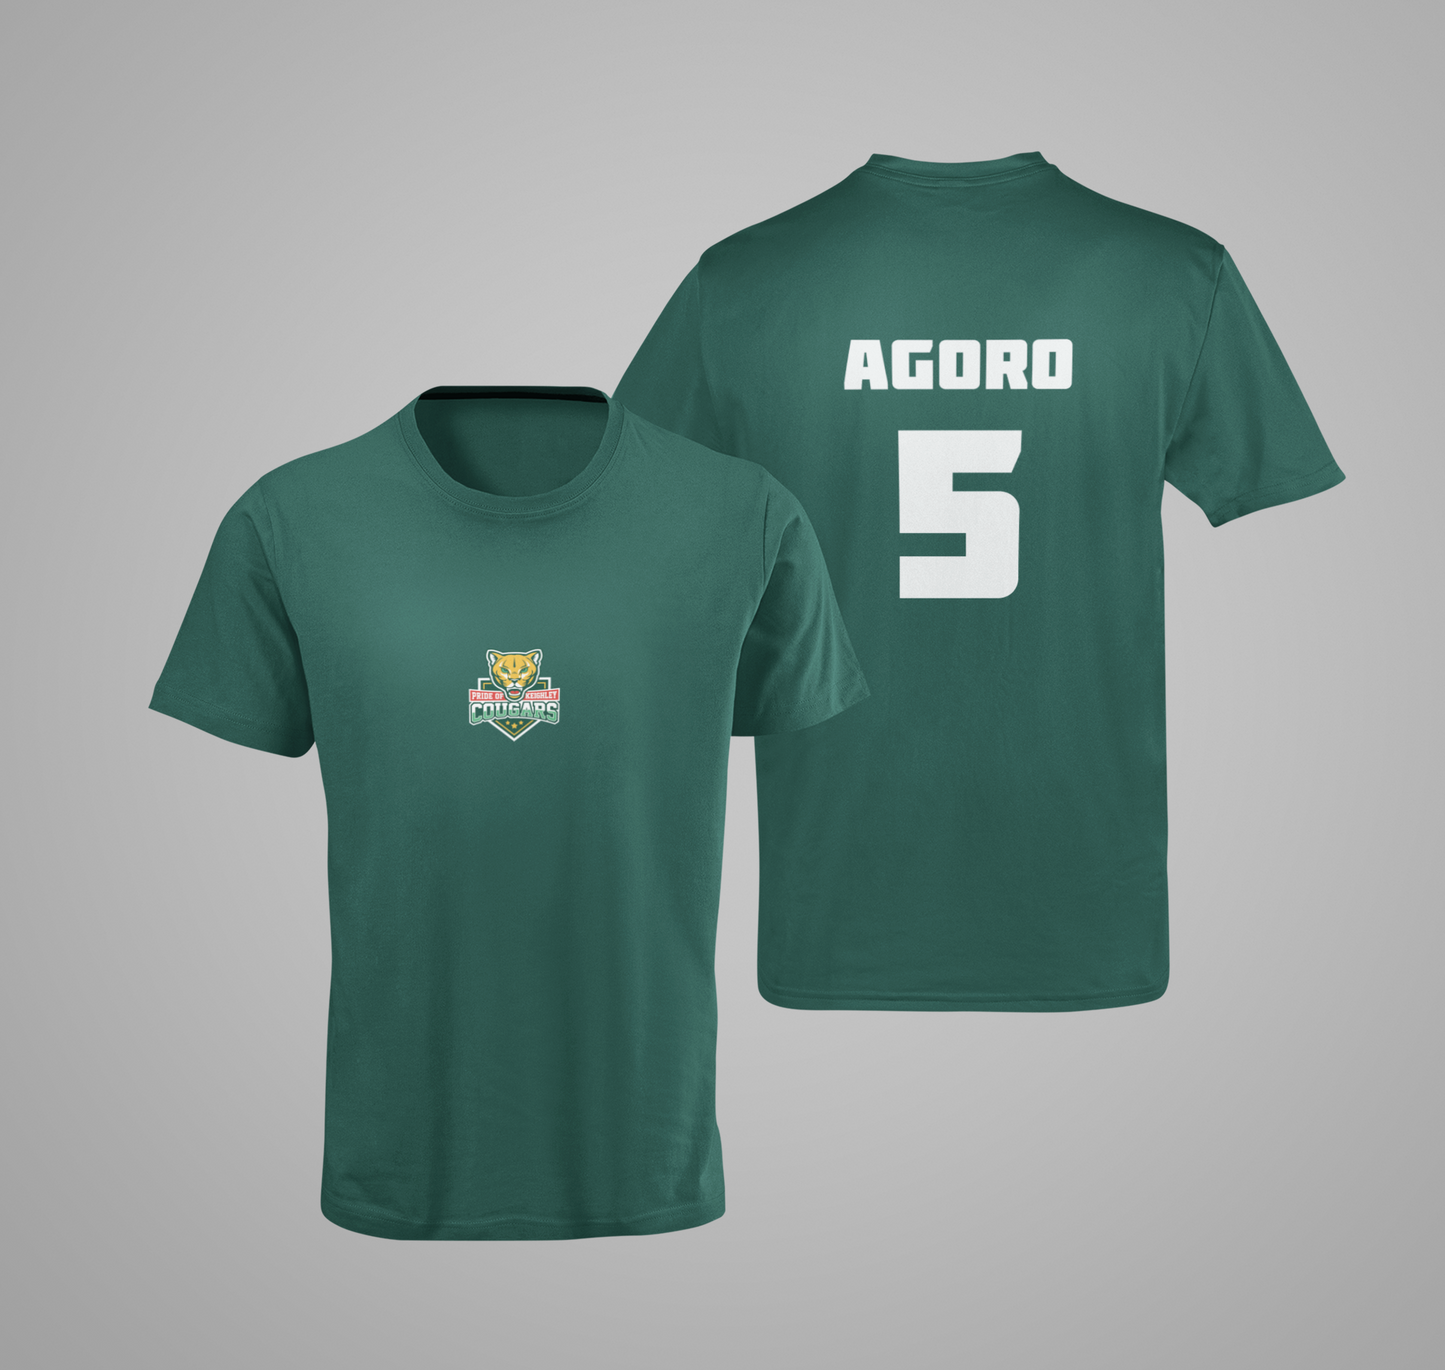 Keighley Cougars Agoro Supporters T-Shirt